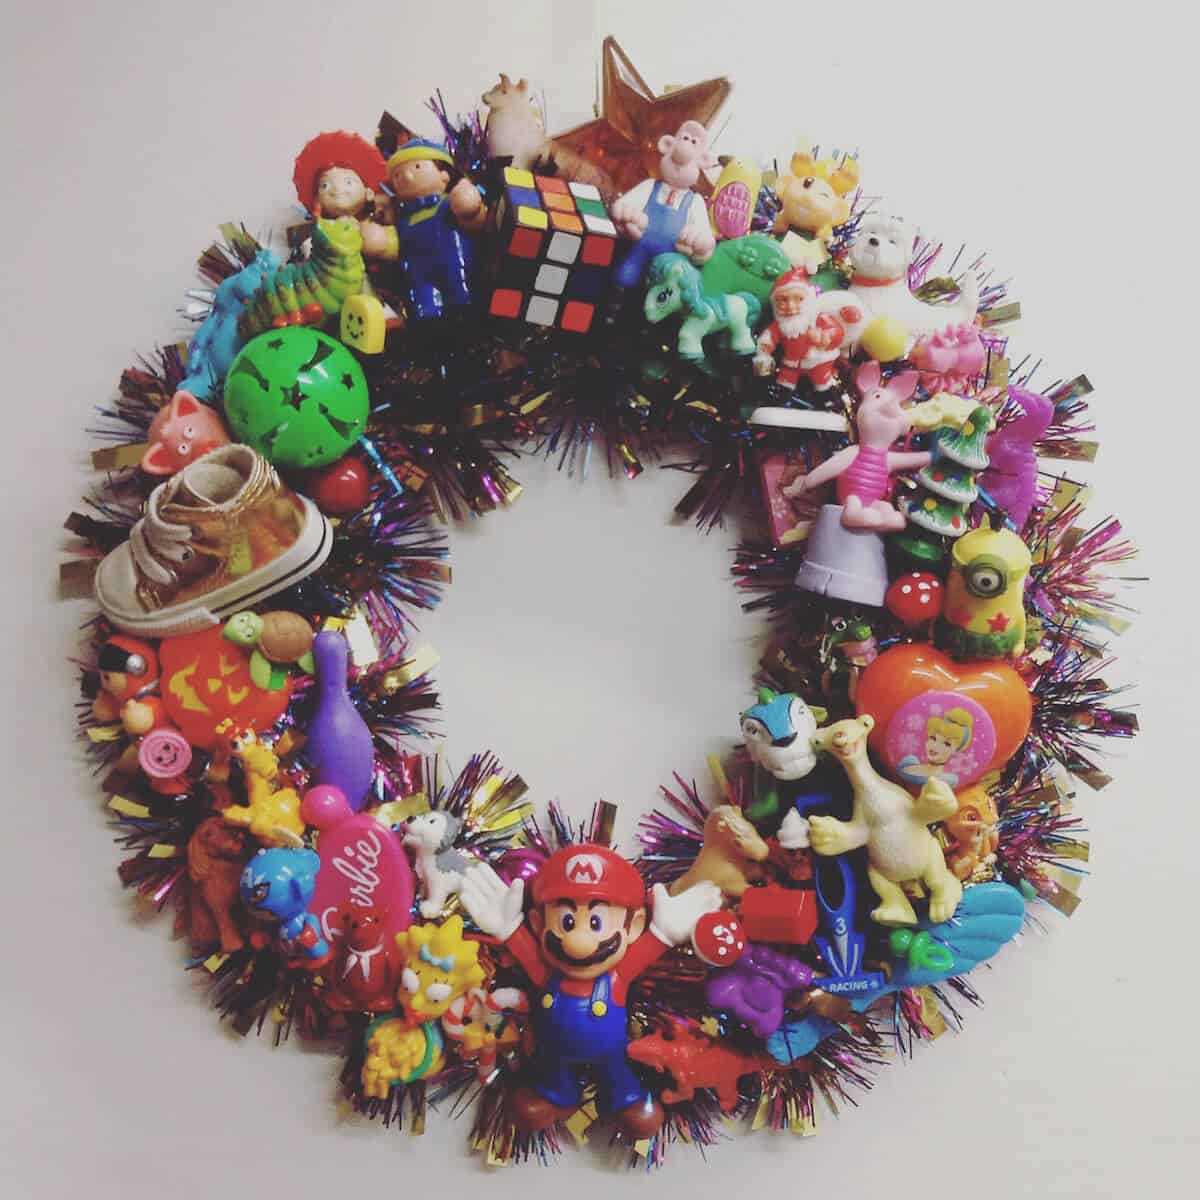  Recycled Christmas Wreath becomes a Toy Memory Wreath (tiffany terry)